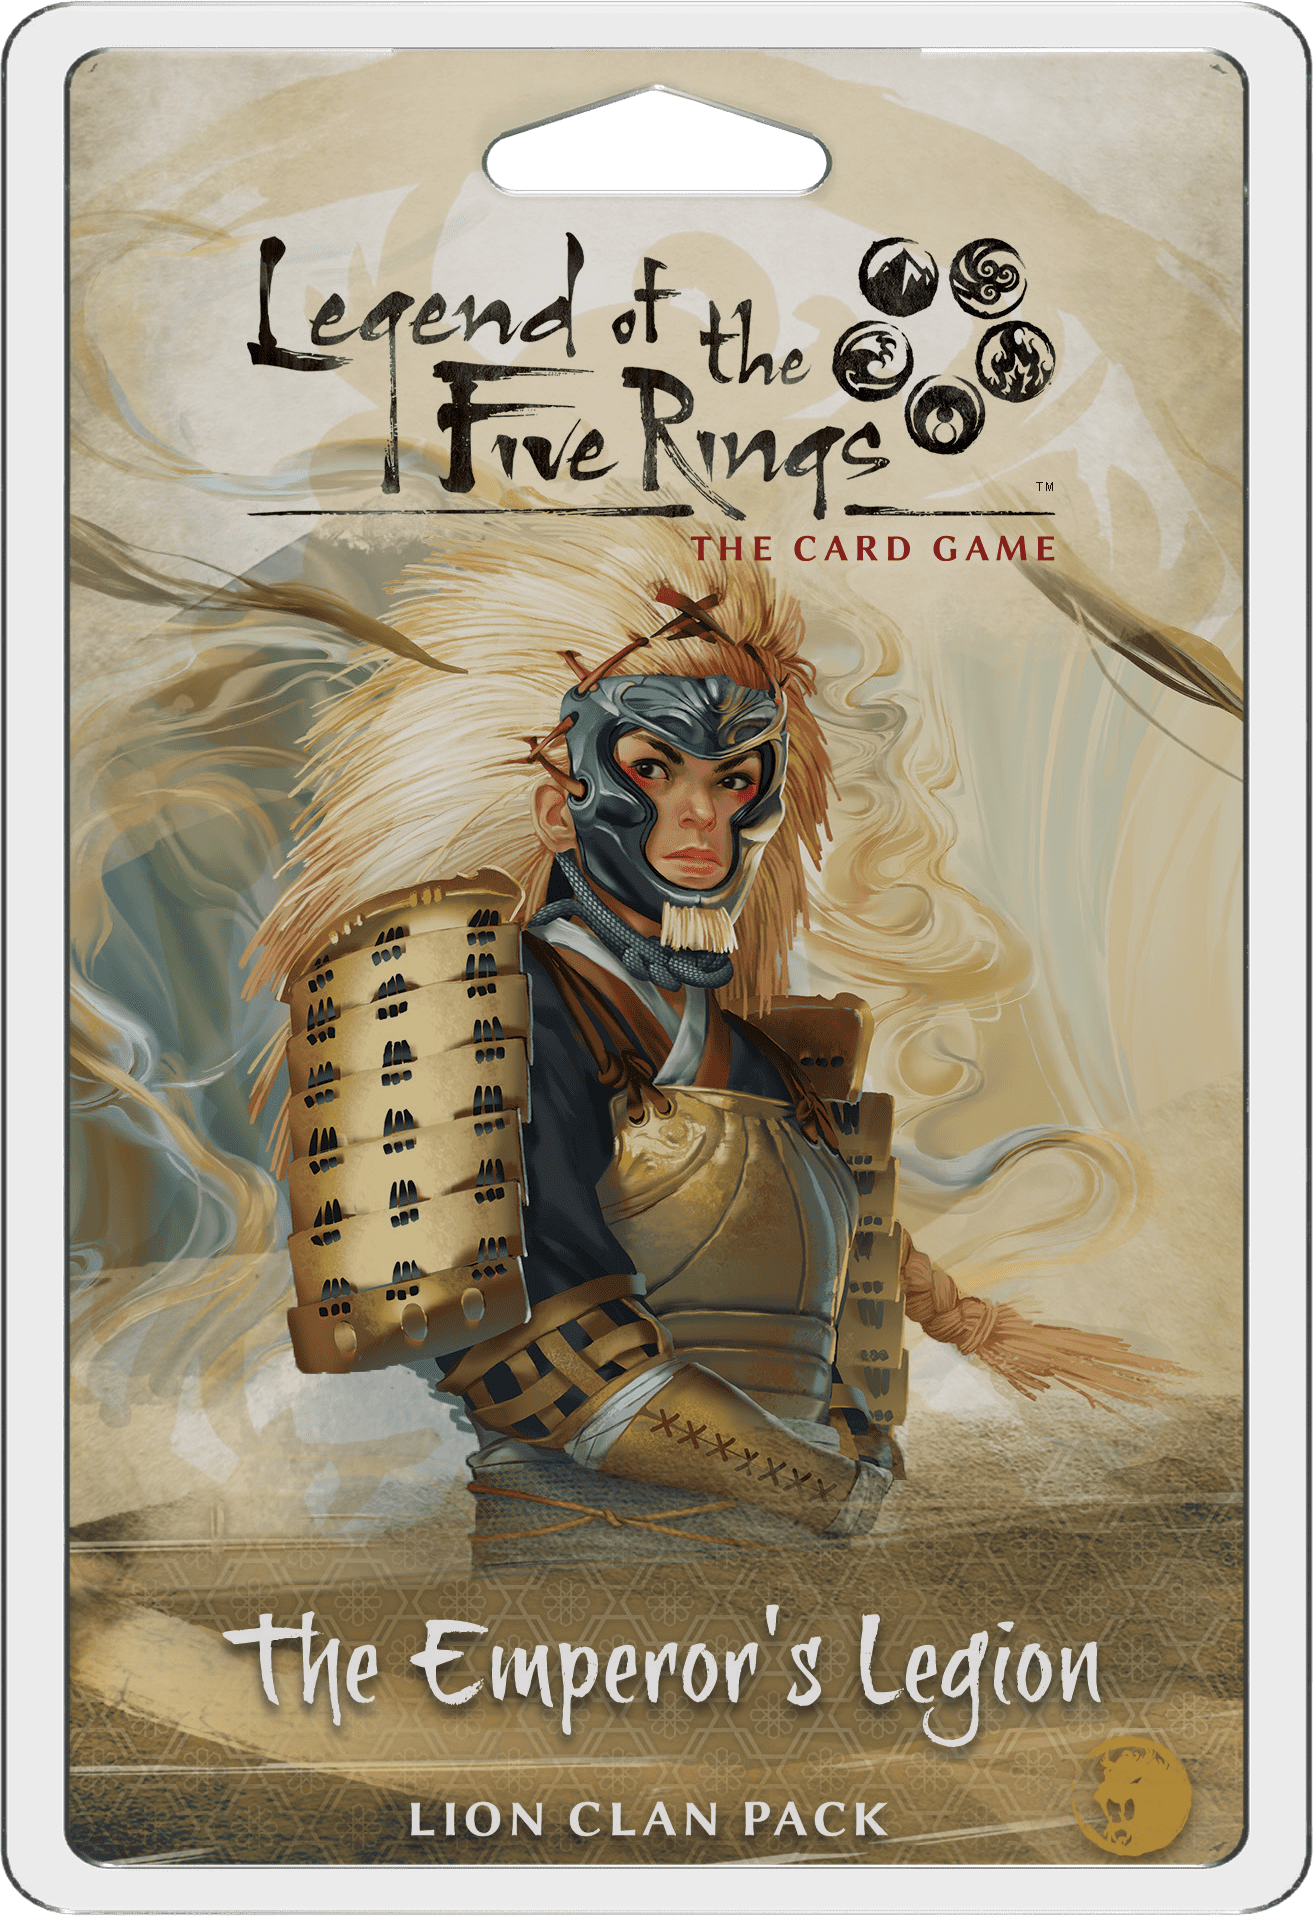 Legend of the Five Rings: The Card Game – The Emperors Legion